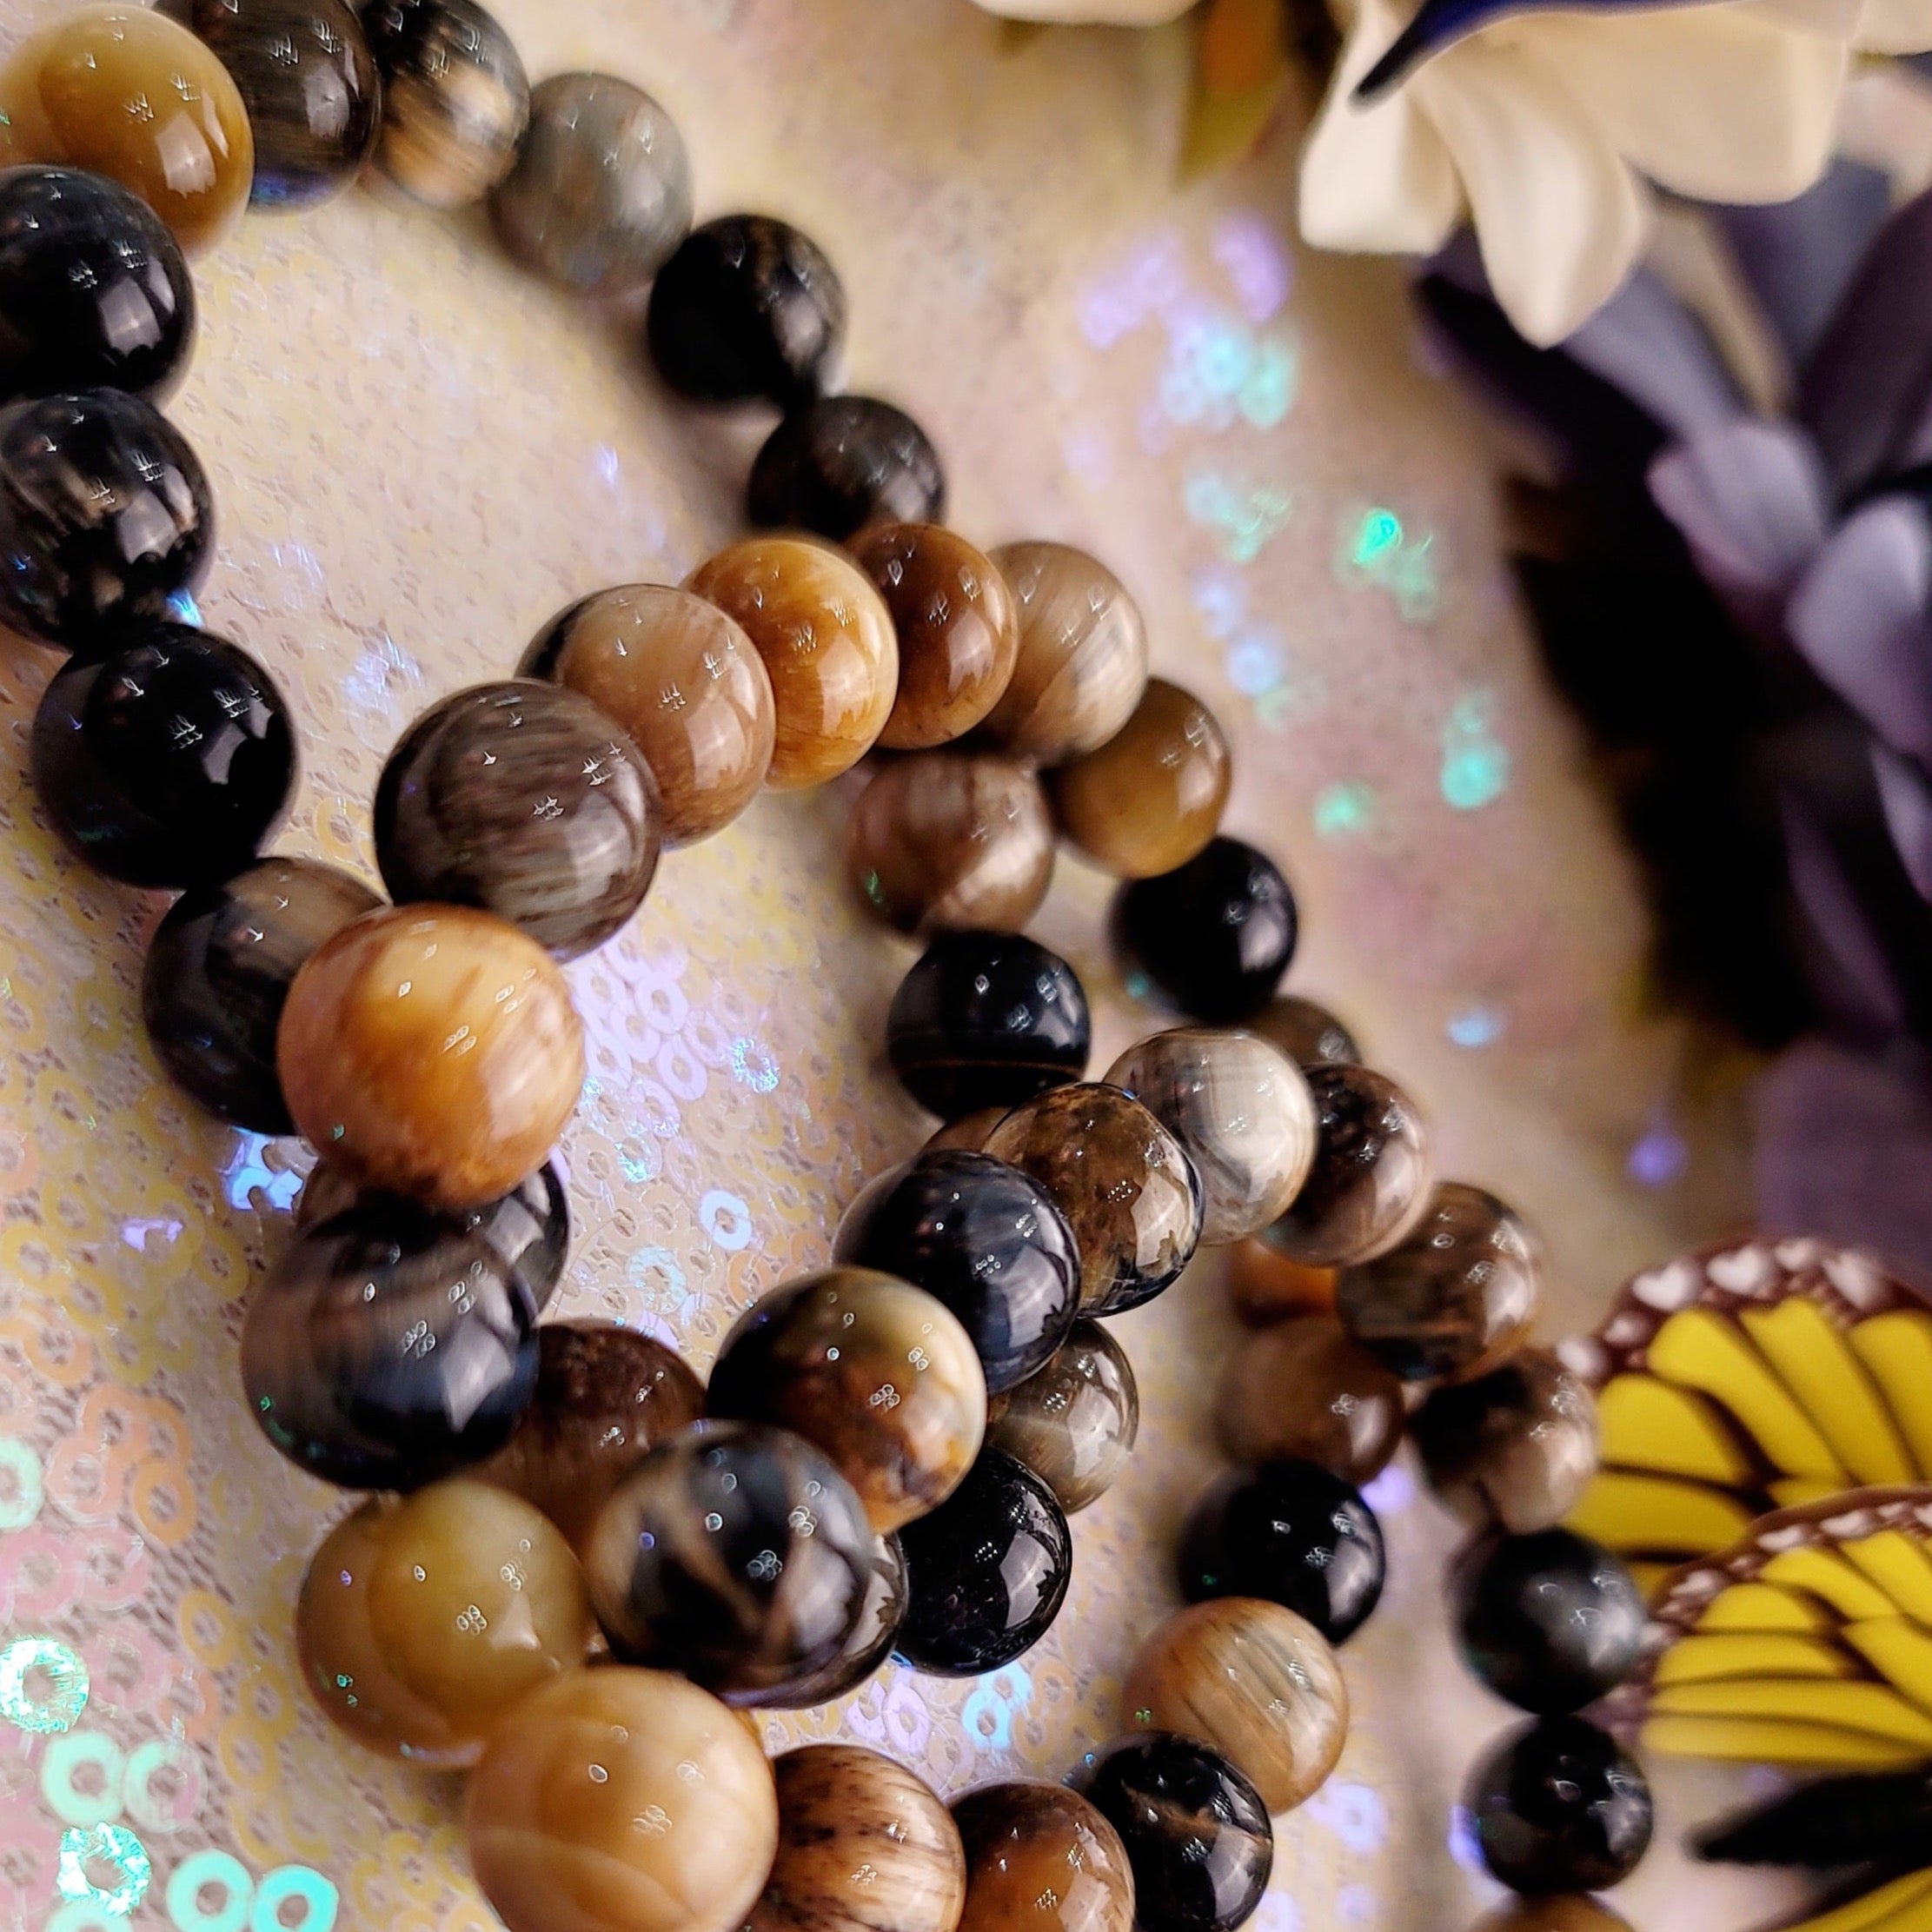 Blue & Yellow Tiger Eye Bracelet for Courage and Strength